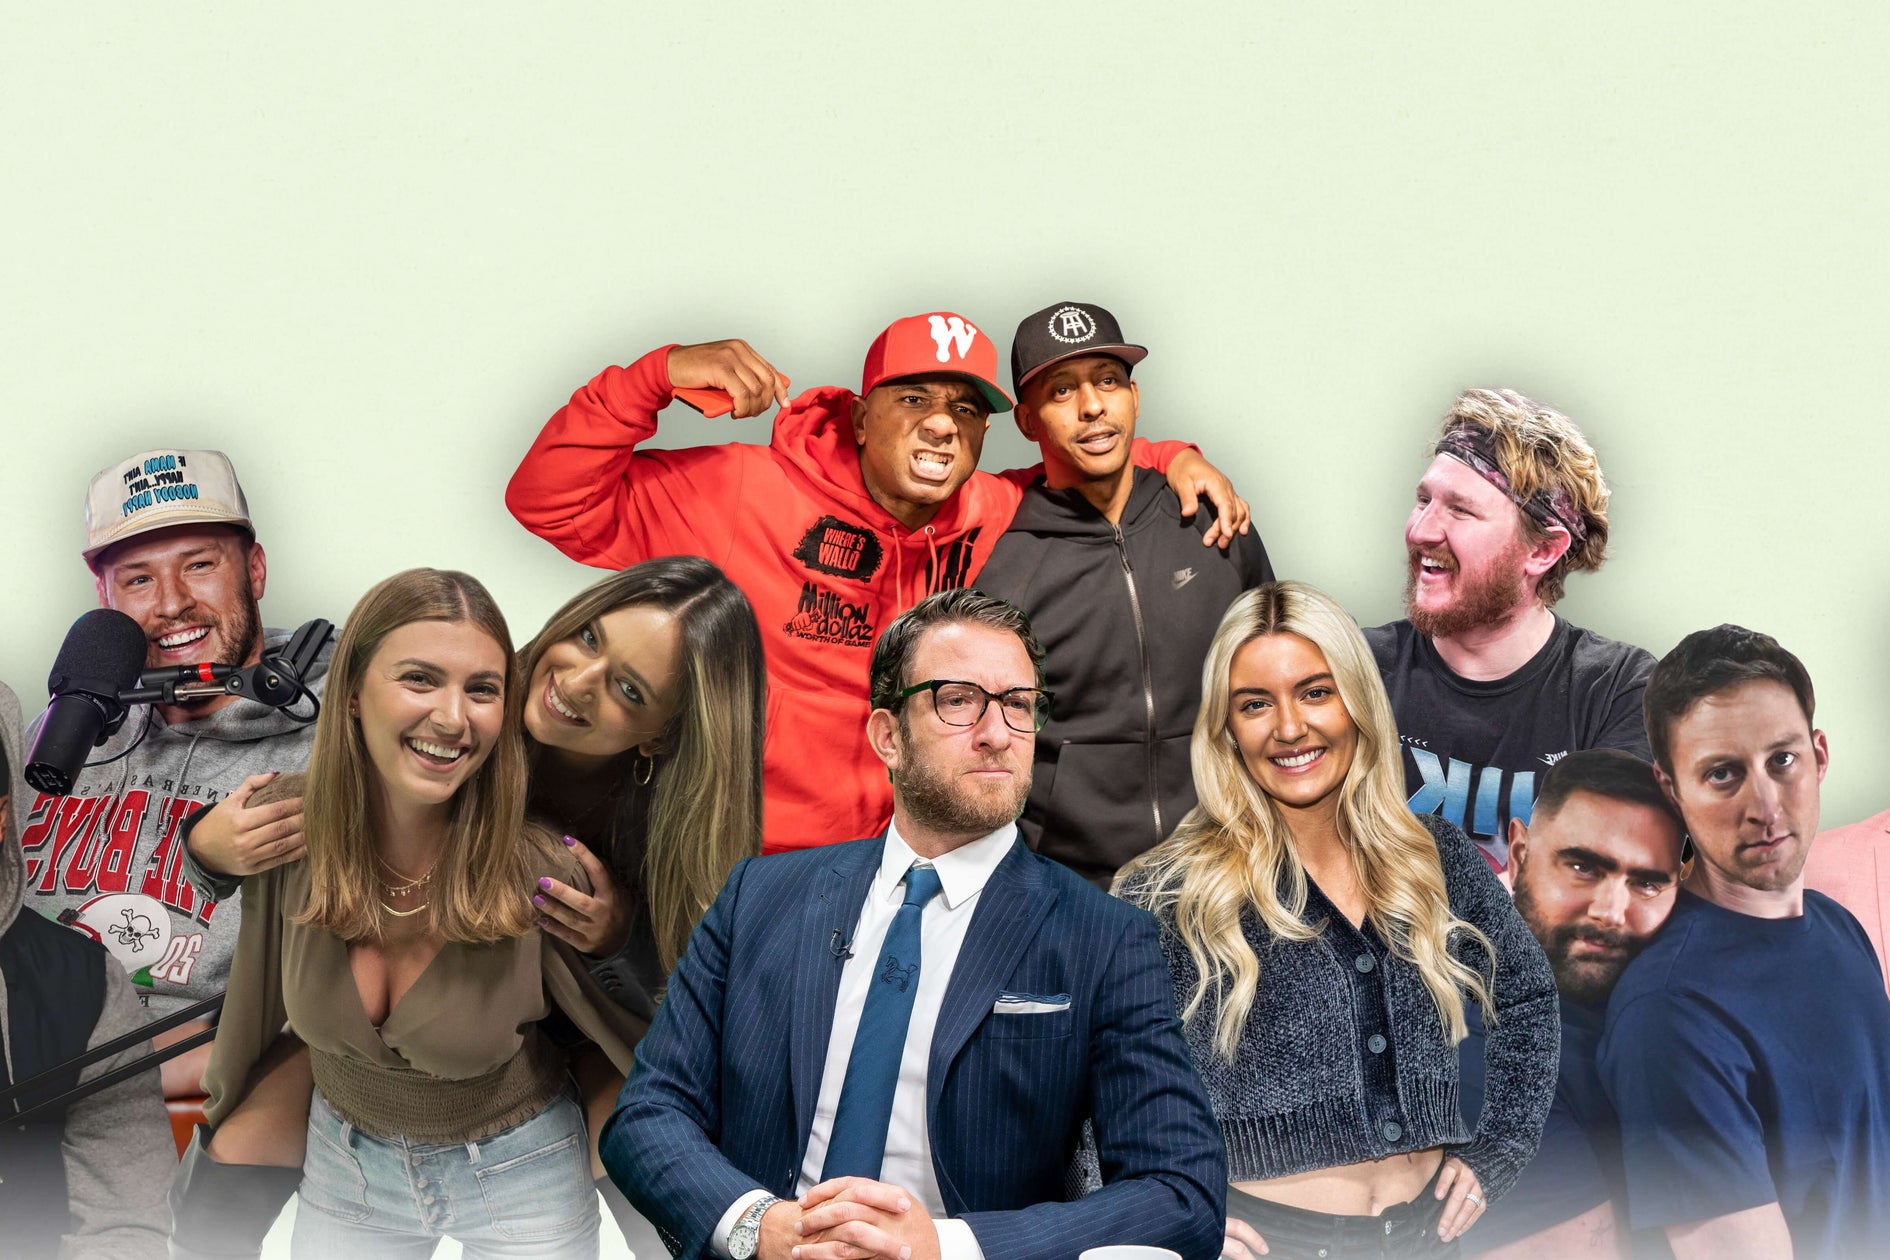 Why Proper Wild Is Partnering With Barstool Sports?